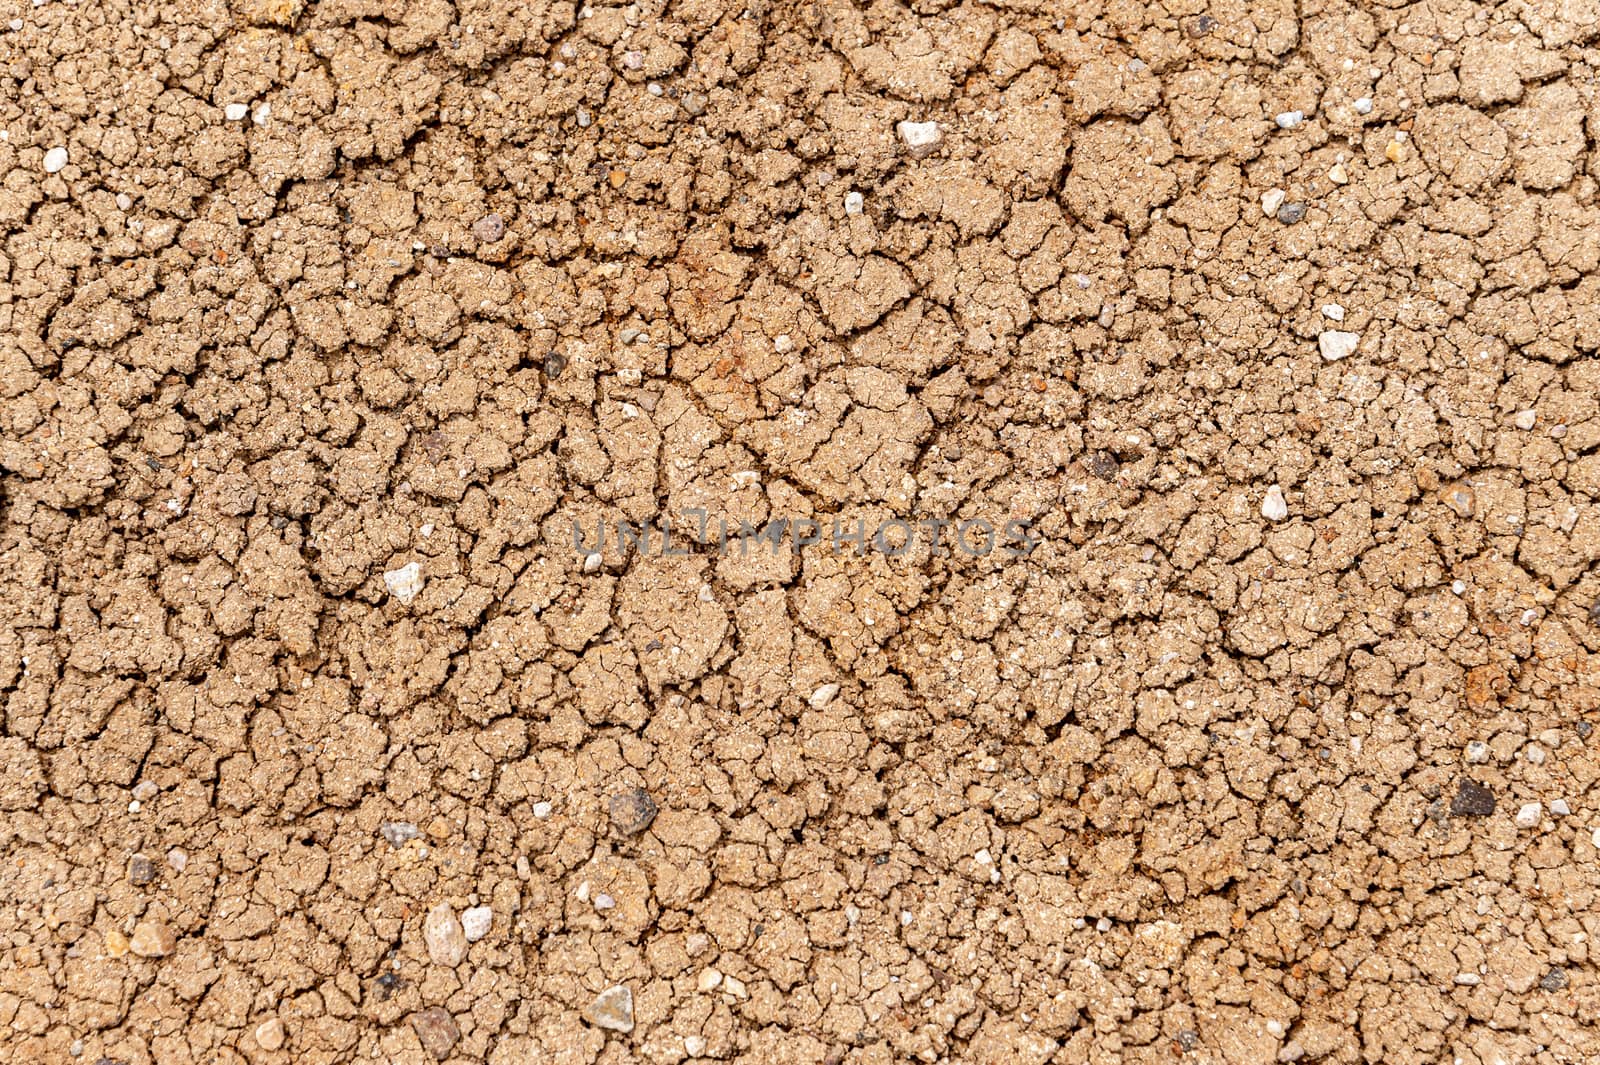 dry ground with cracks by mbruxelle